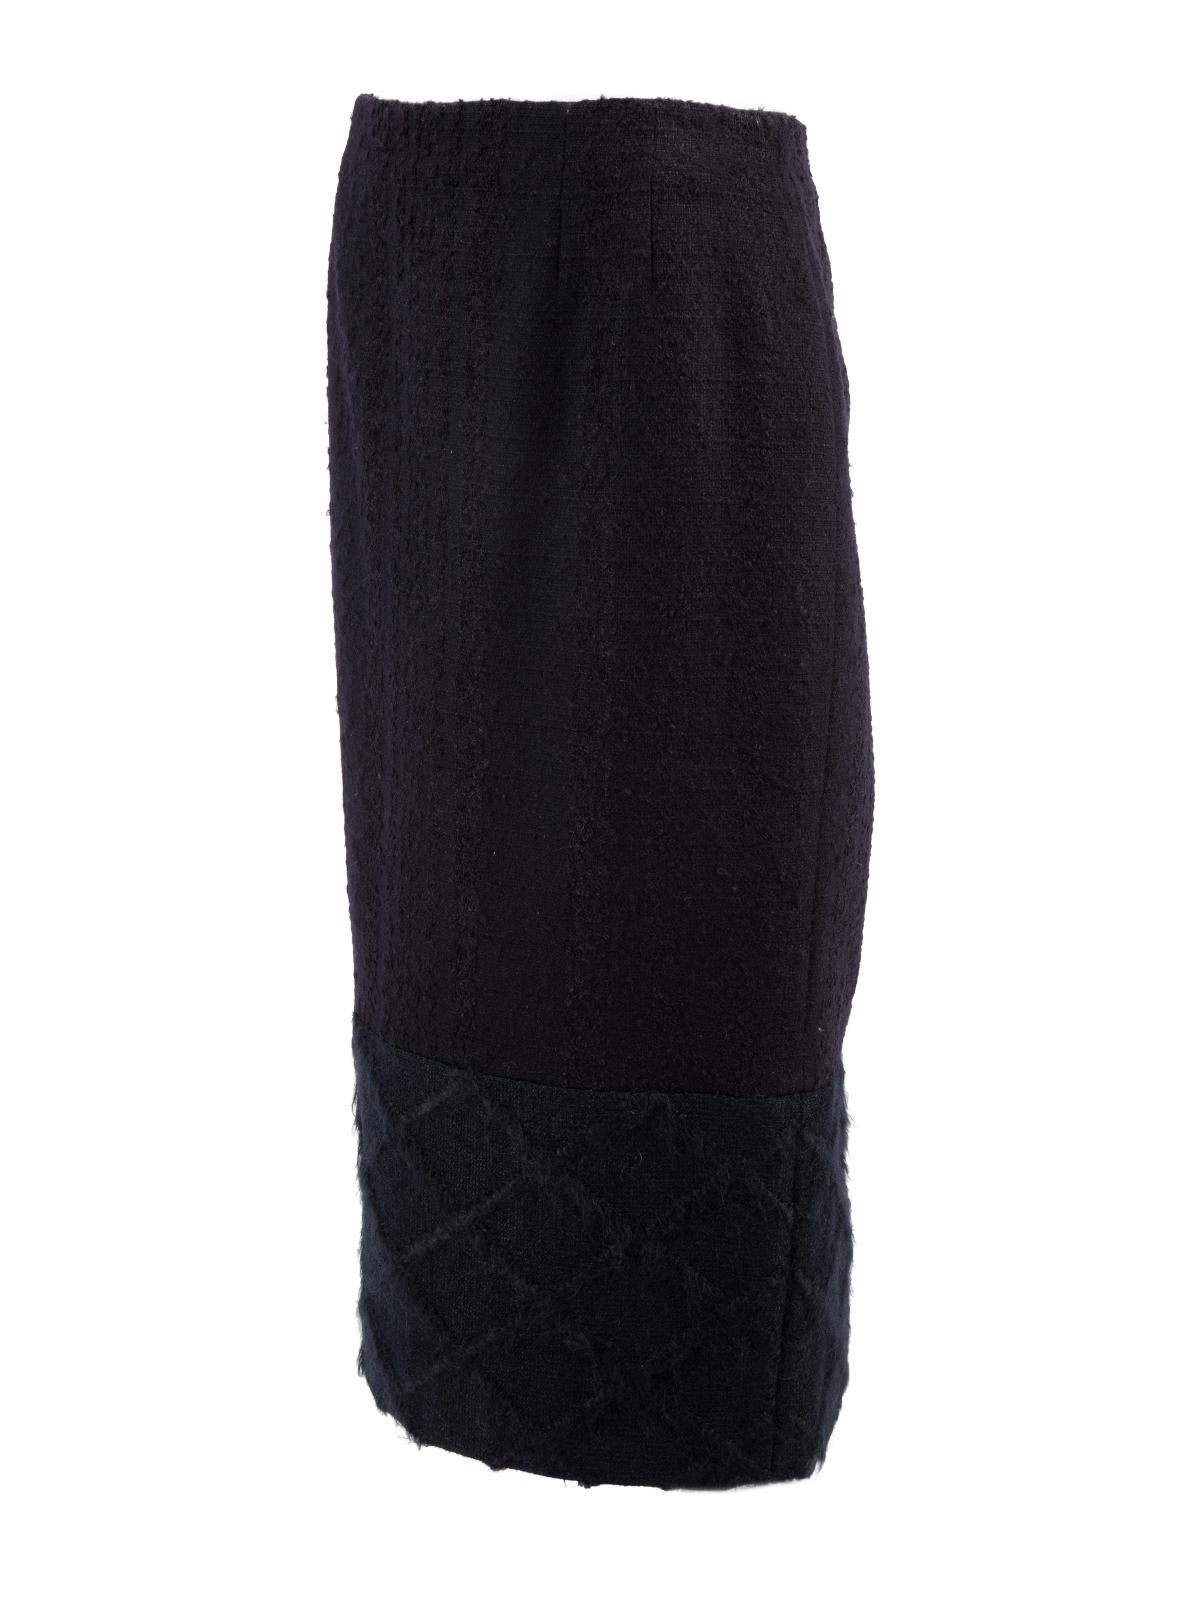 Dior Women's Navy Button Wool Pencil Skirt For Sale 1